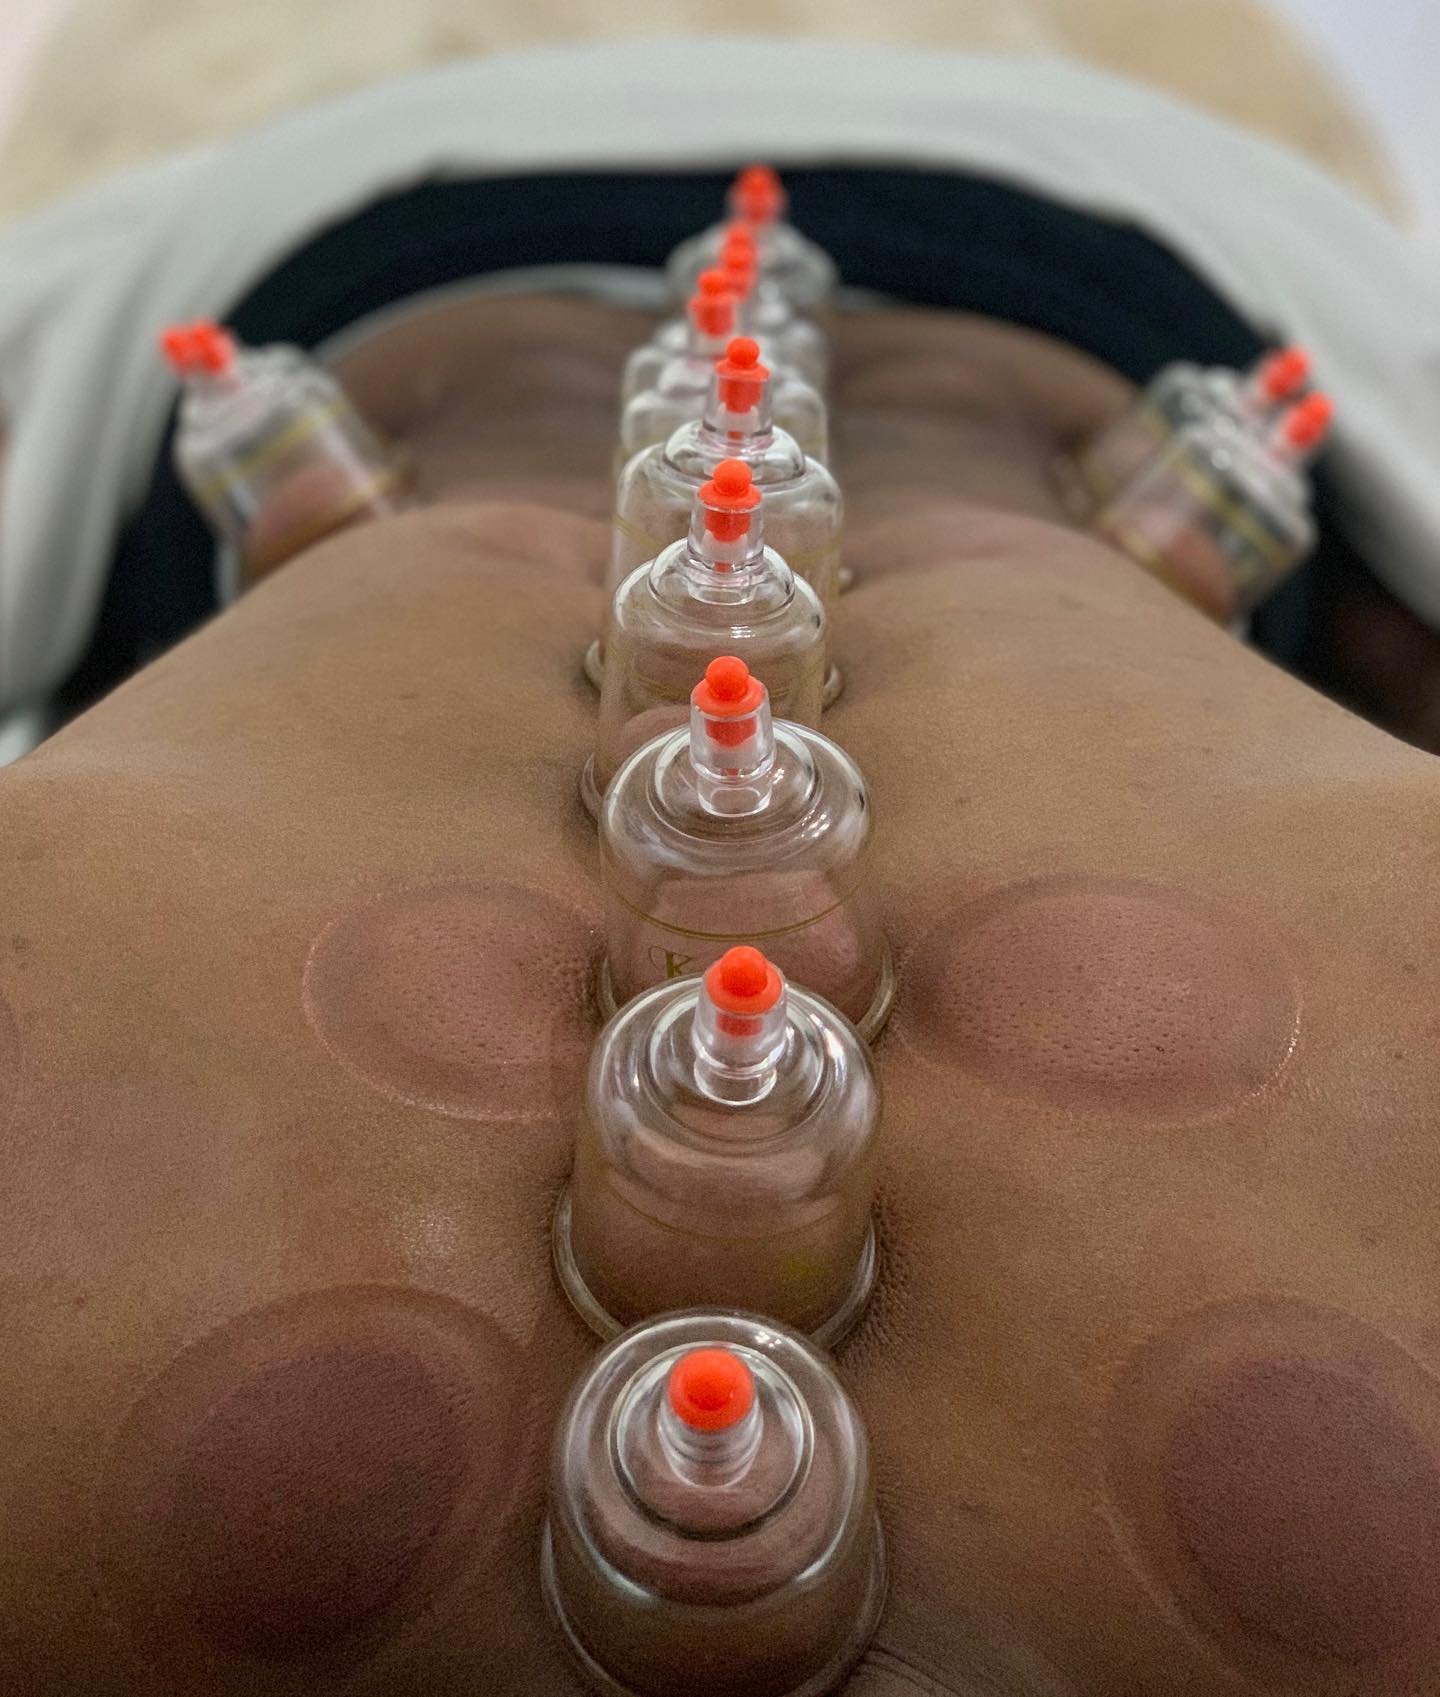 Looking for a natural way to promote healing and relaxation? 

Cupping therapy might just be the solution you&rsquo;ve been searching for! 

Cupping has many amazing benefits, including:
✓ eases muscle tension + reduce pain
✓ promotes relaxation + st